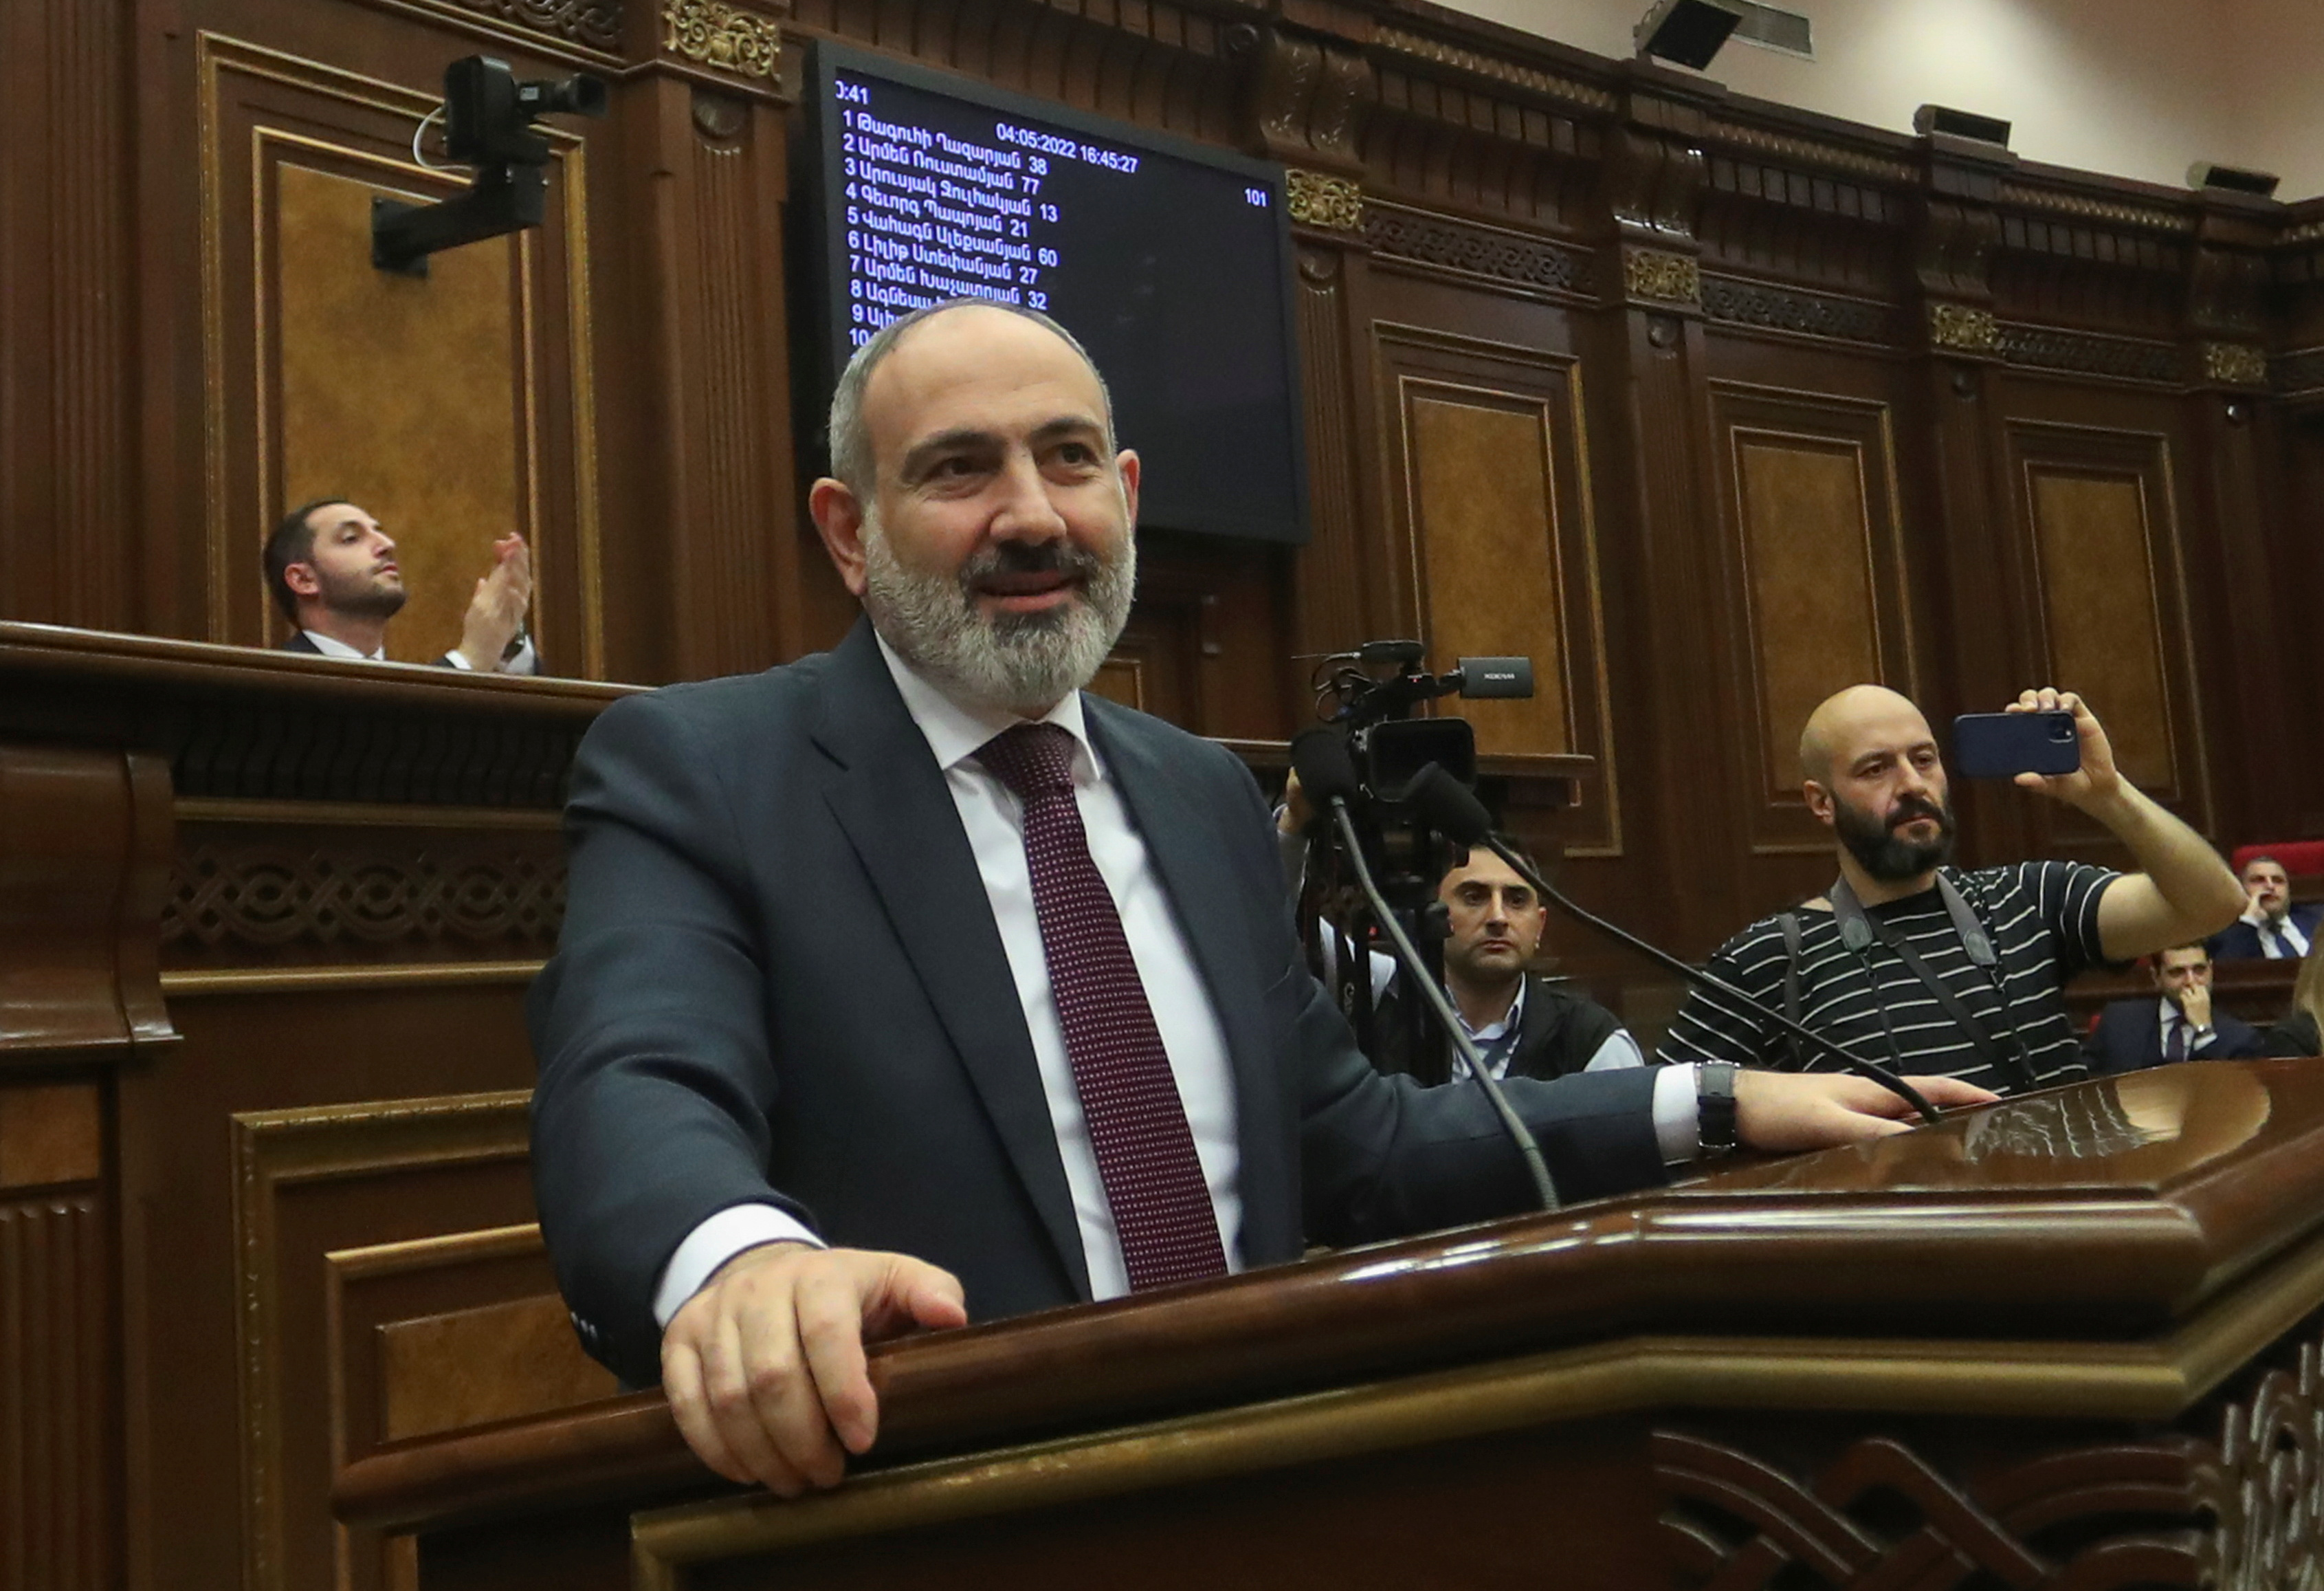 Armenian Prime Minister Pashinyan attends a session of the National Assembly in Yerevan